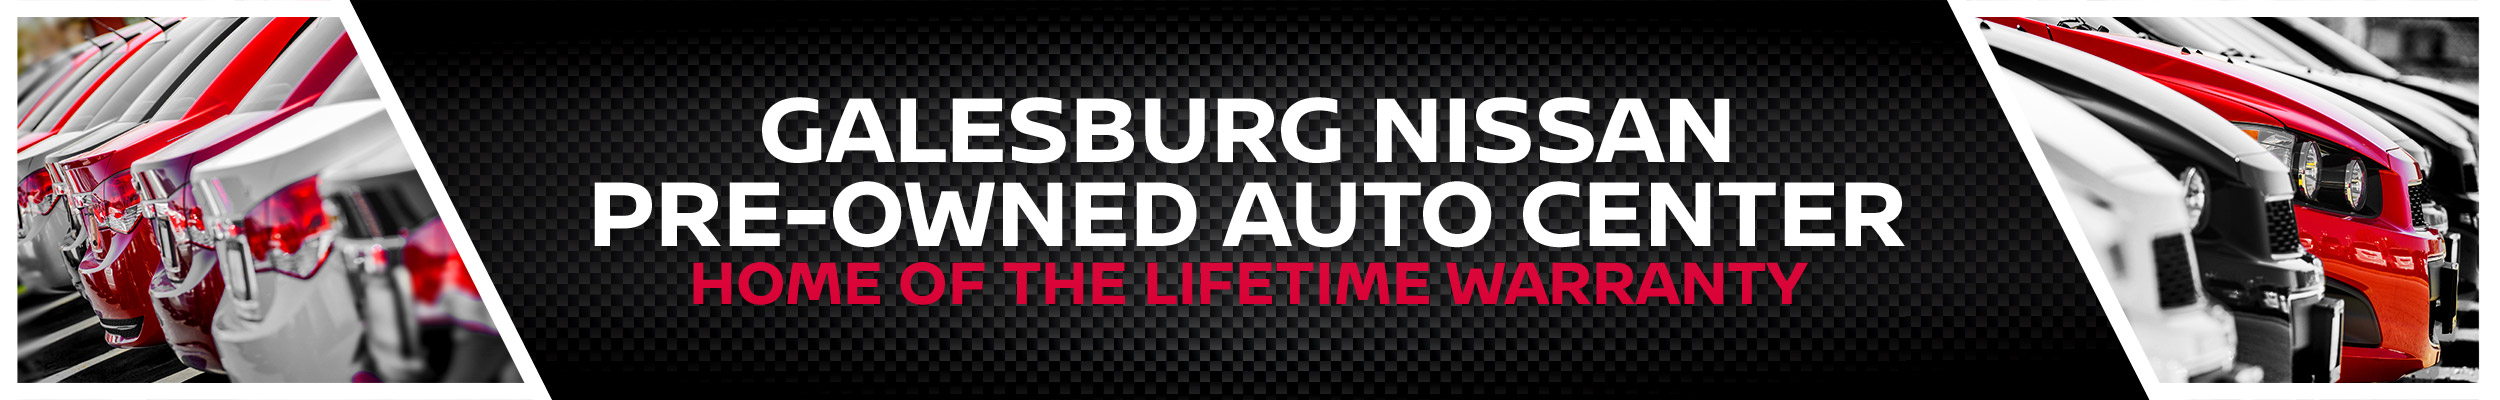 Pre-Owned Auto Center | Galesburg Nissan | Galesburg, IL